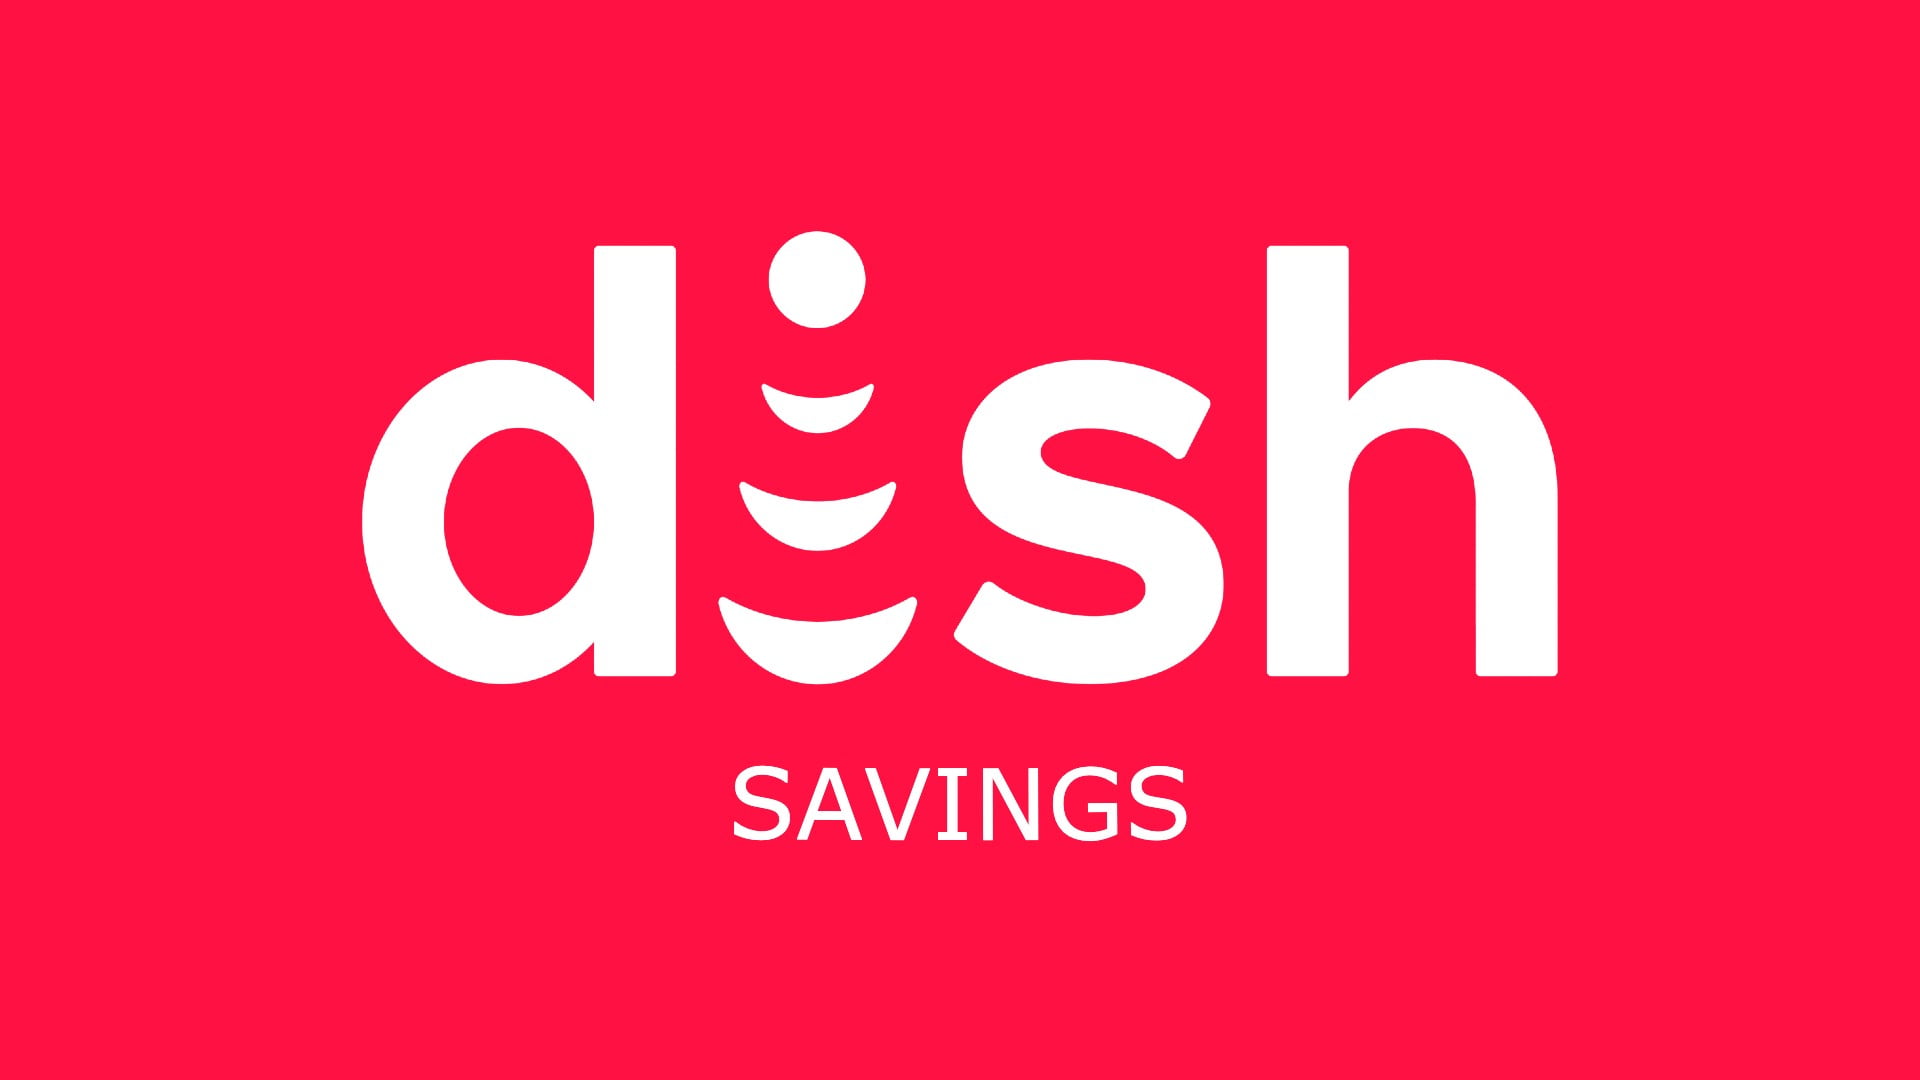 Save money with Dish Network. All the benefits of Dish Network cost savings.